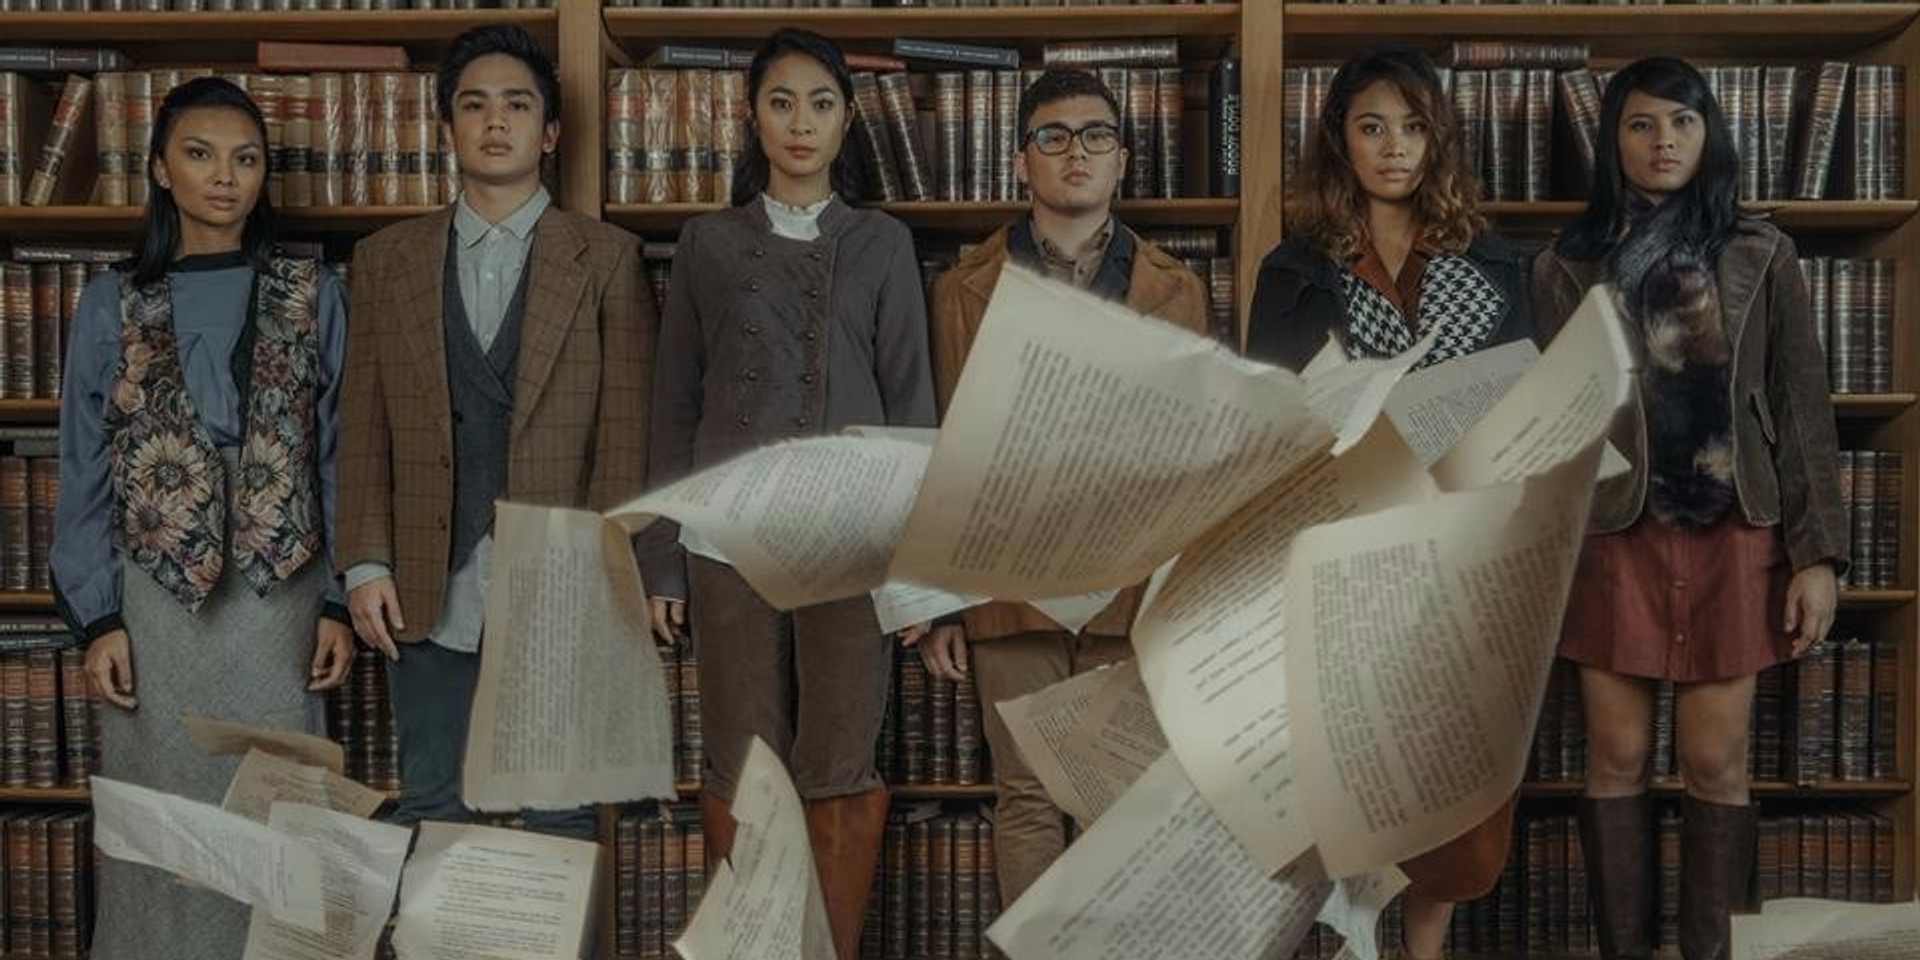 The Ransom Collective to represent the Philippines in ASEAN - India Music Festival